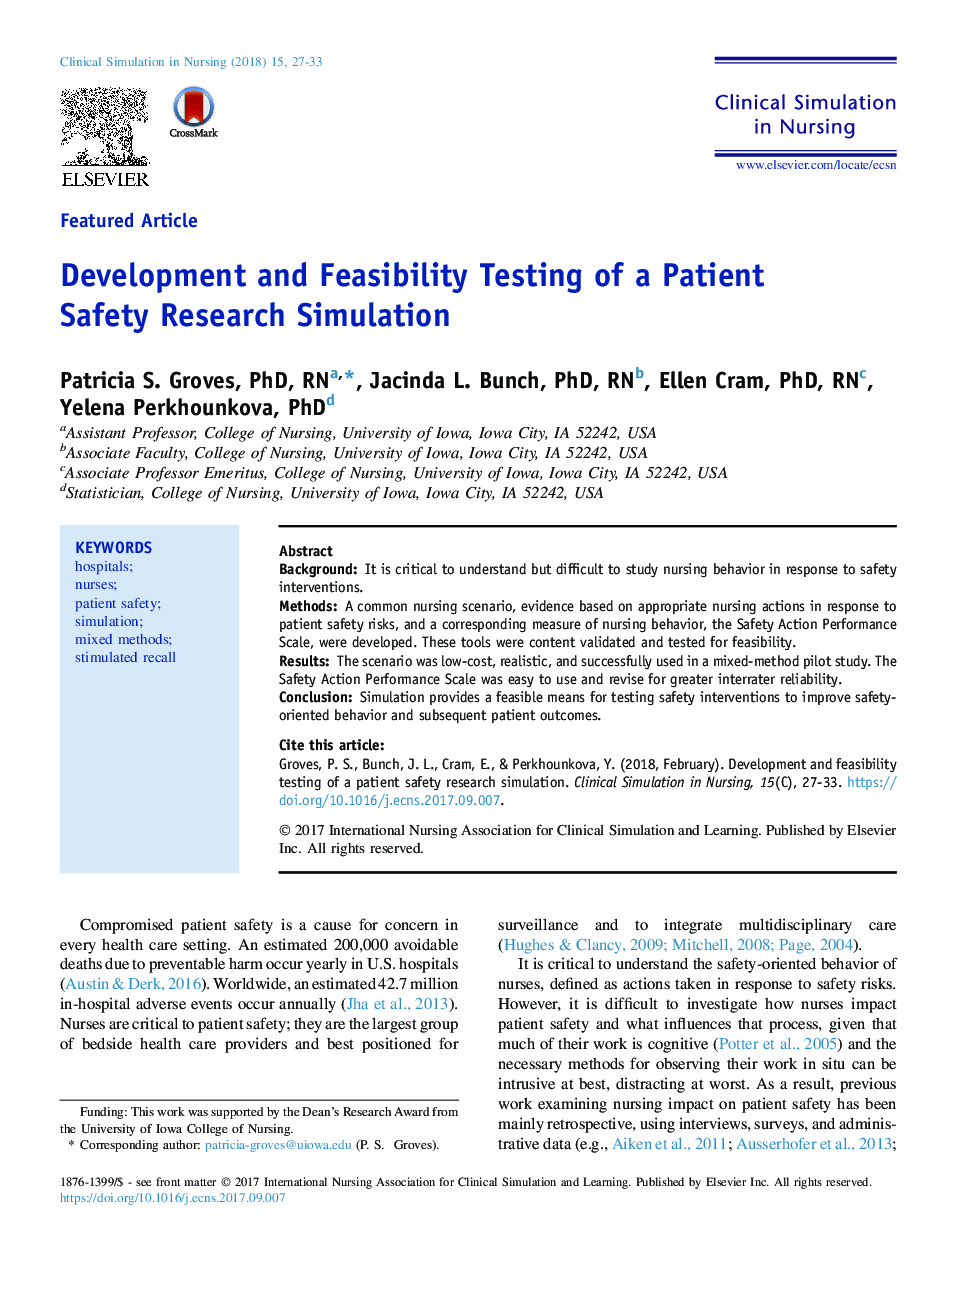 Development and Feasibility Testing of a Patient Safety Research Simulation